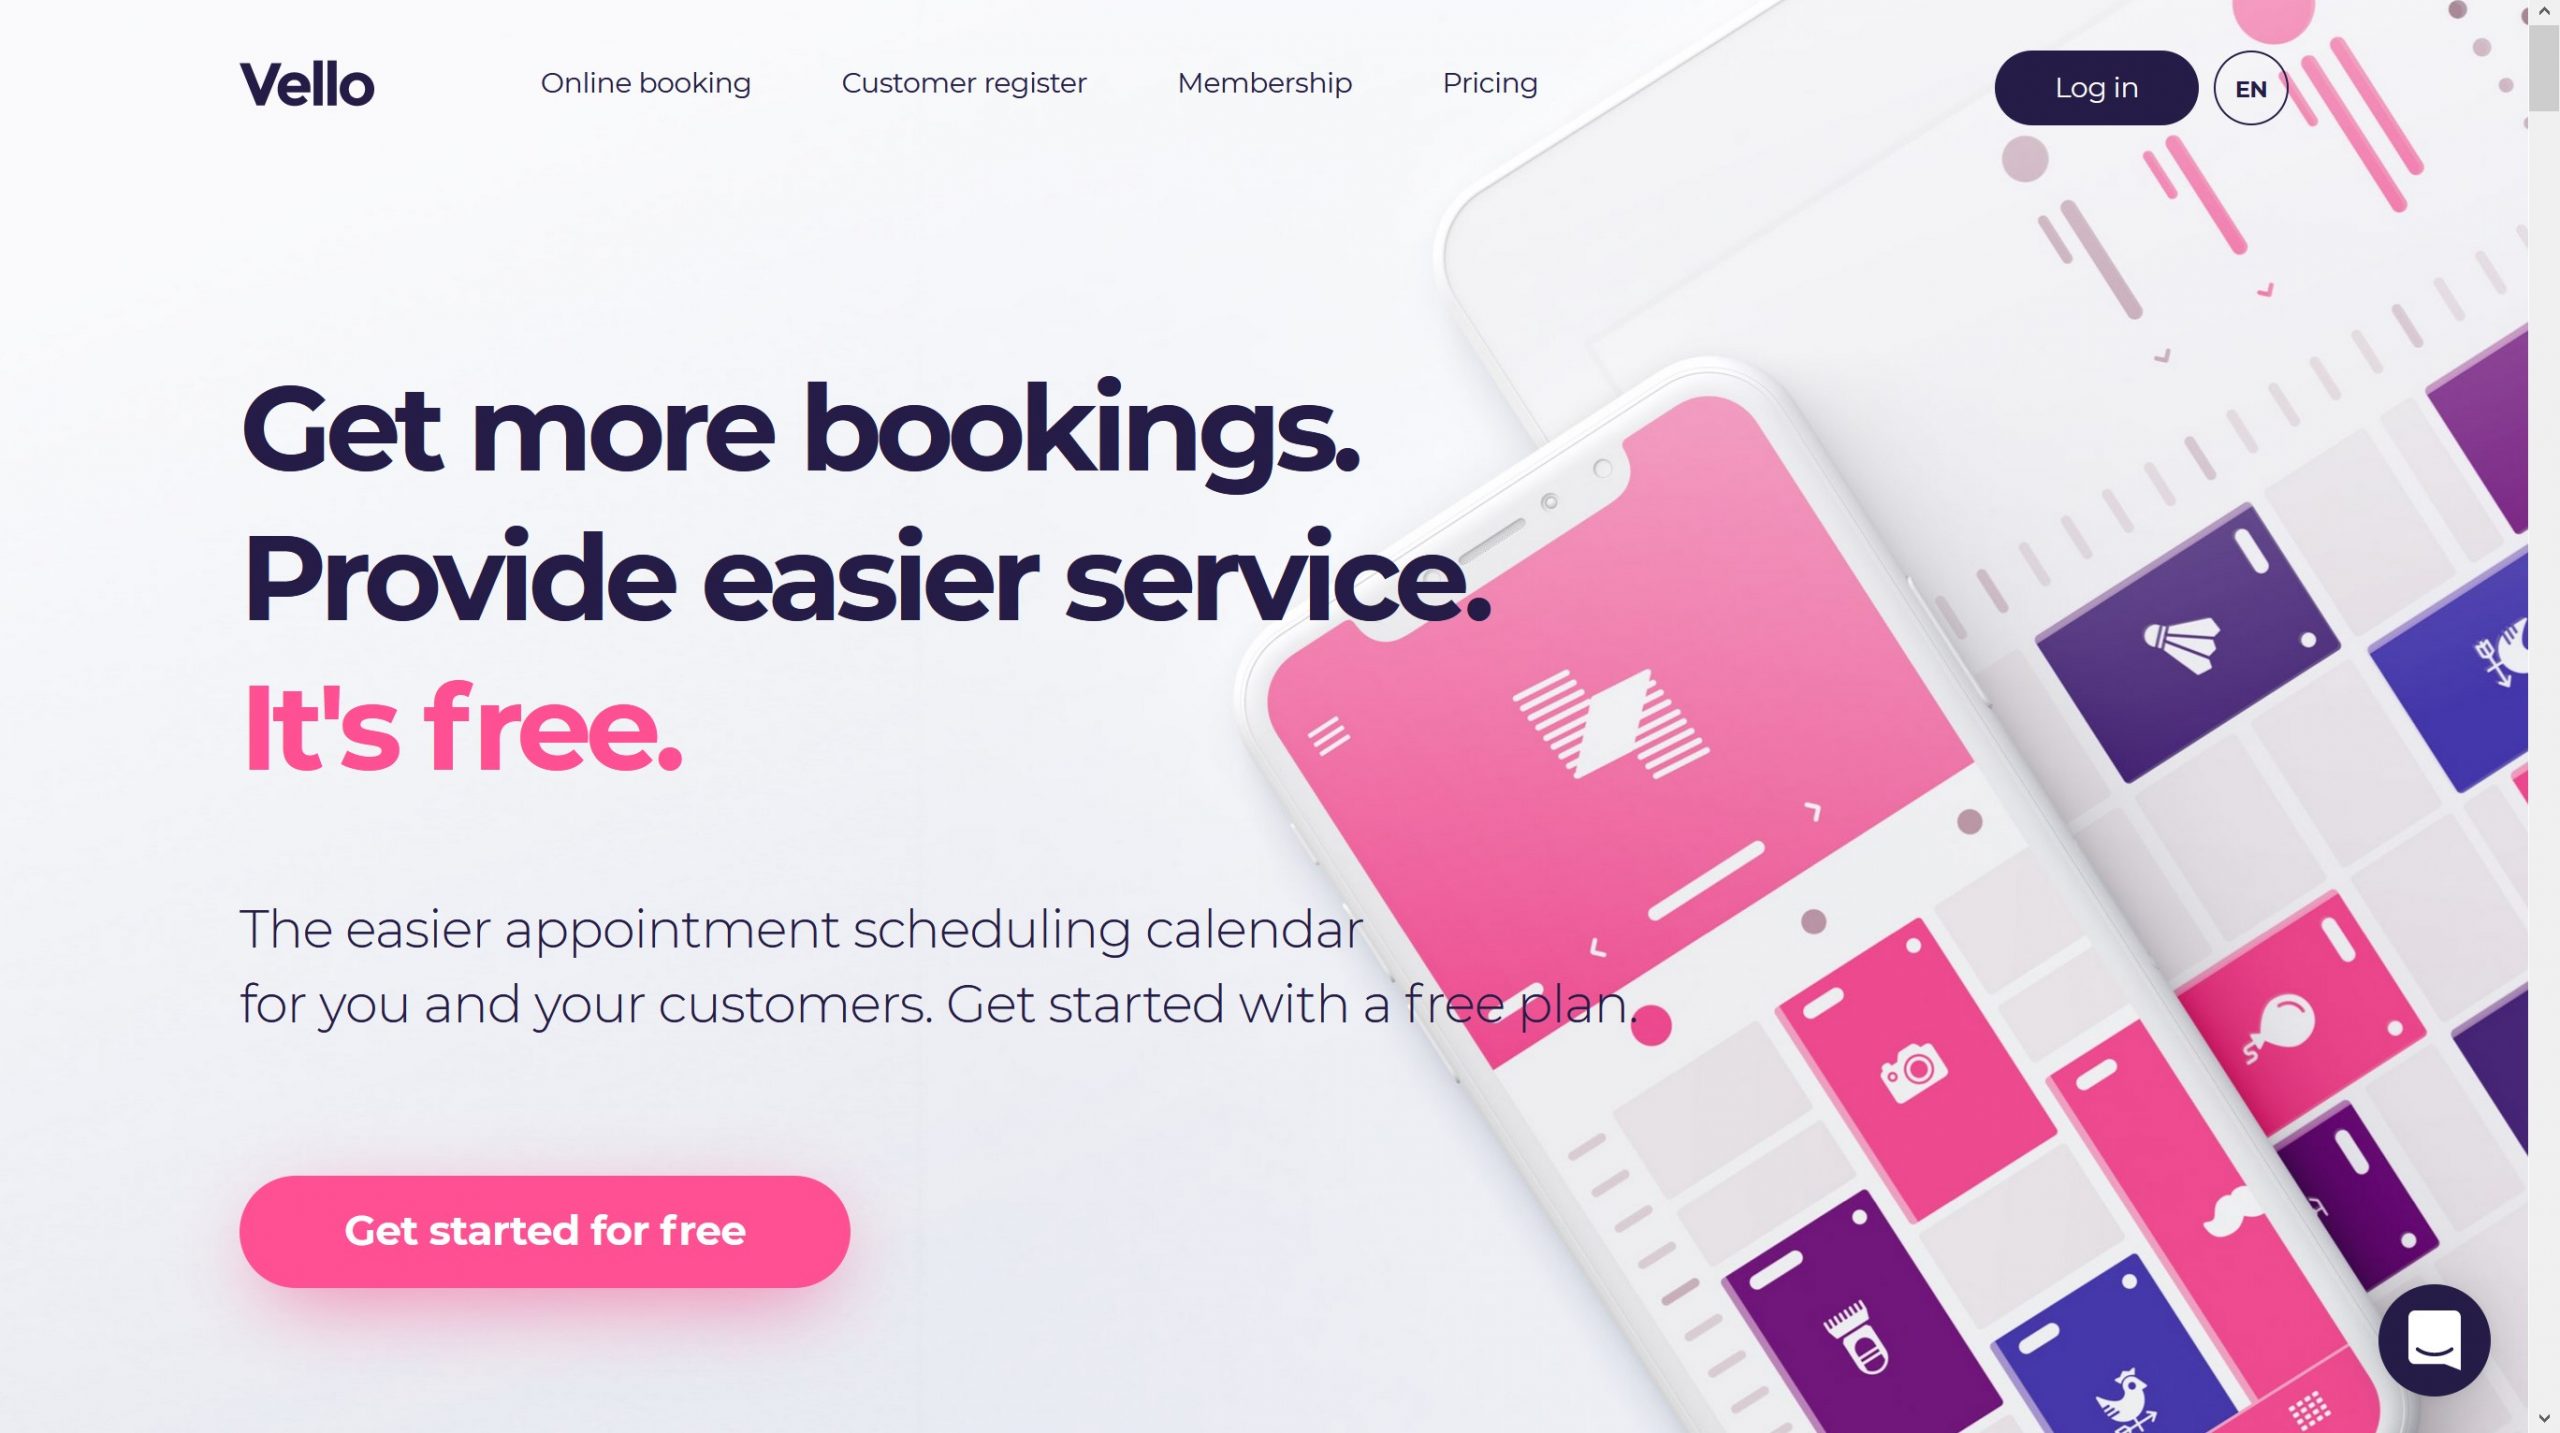 How to create an online booking page for free with Vello